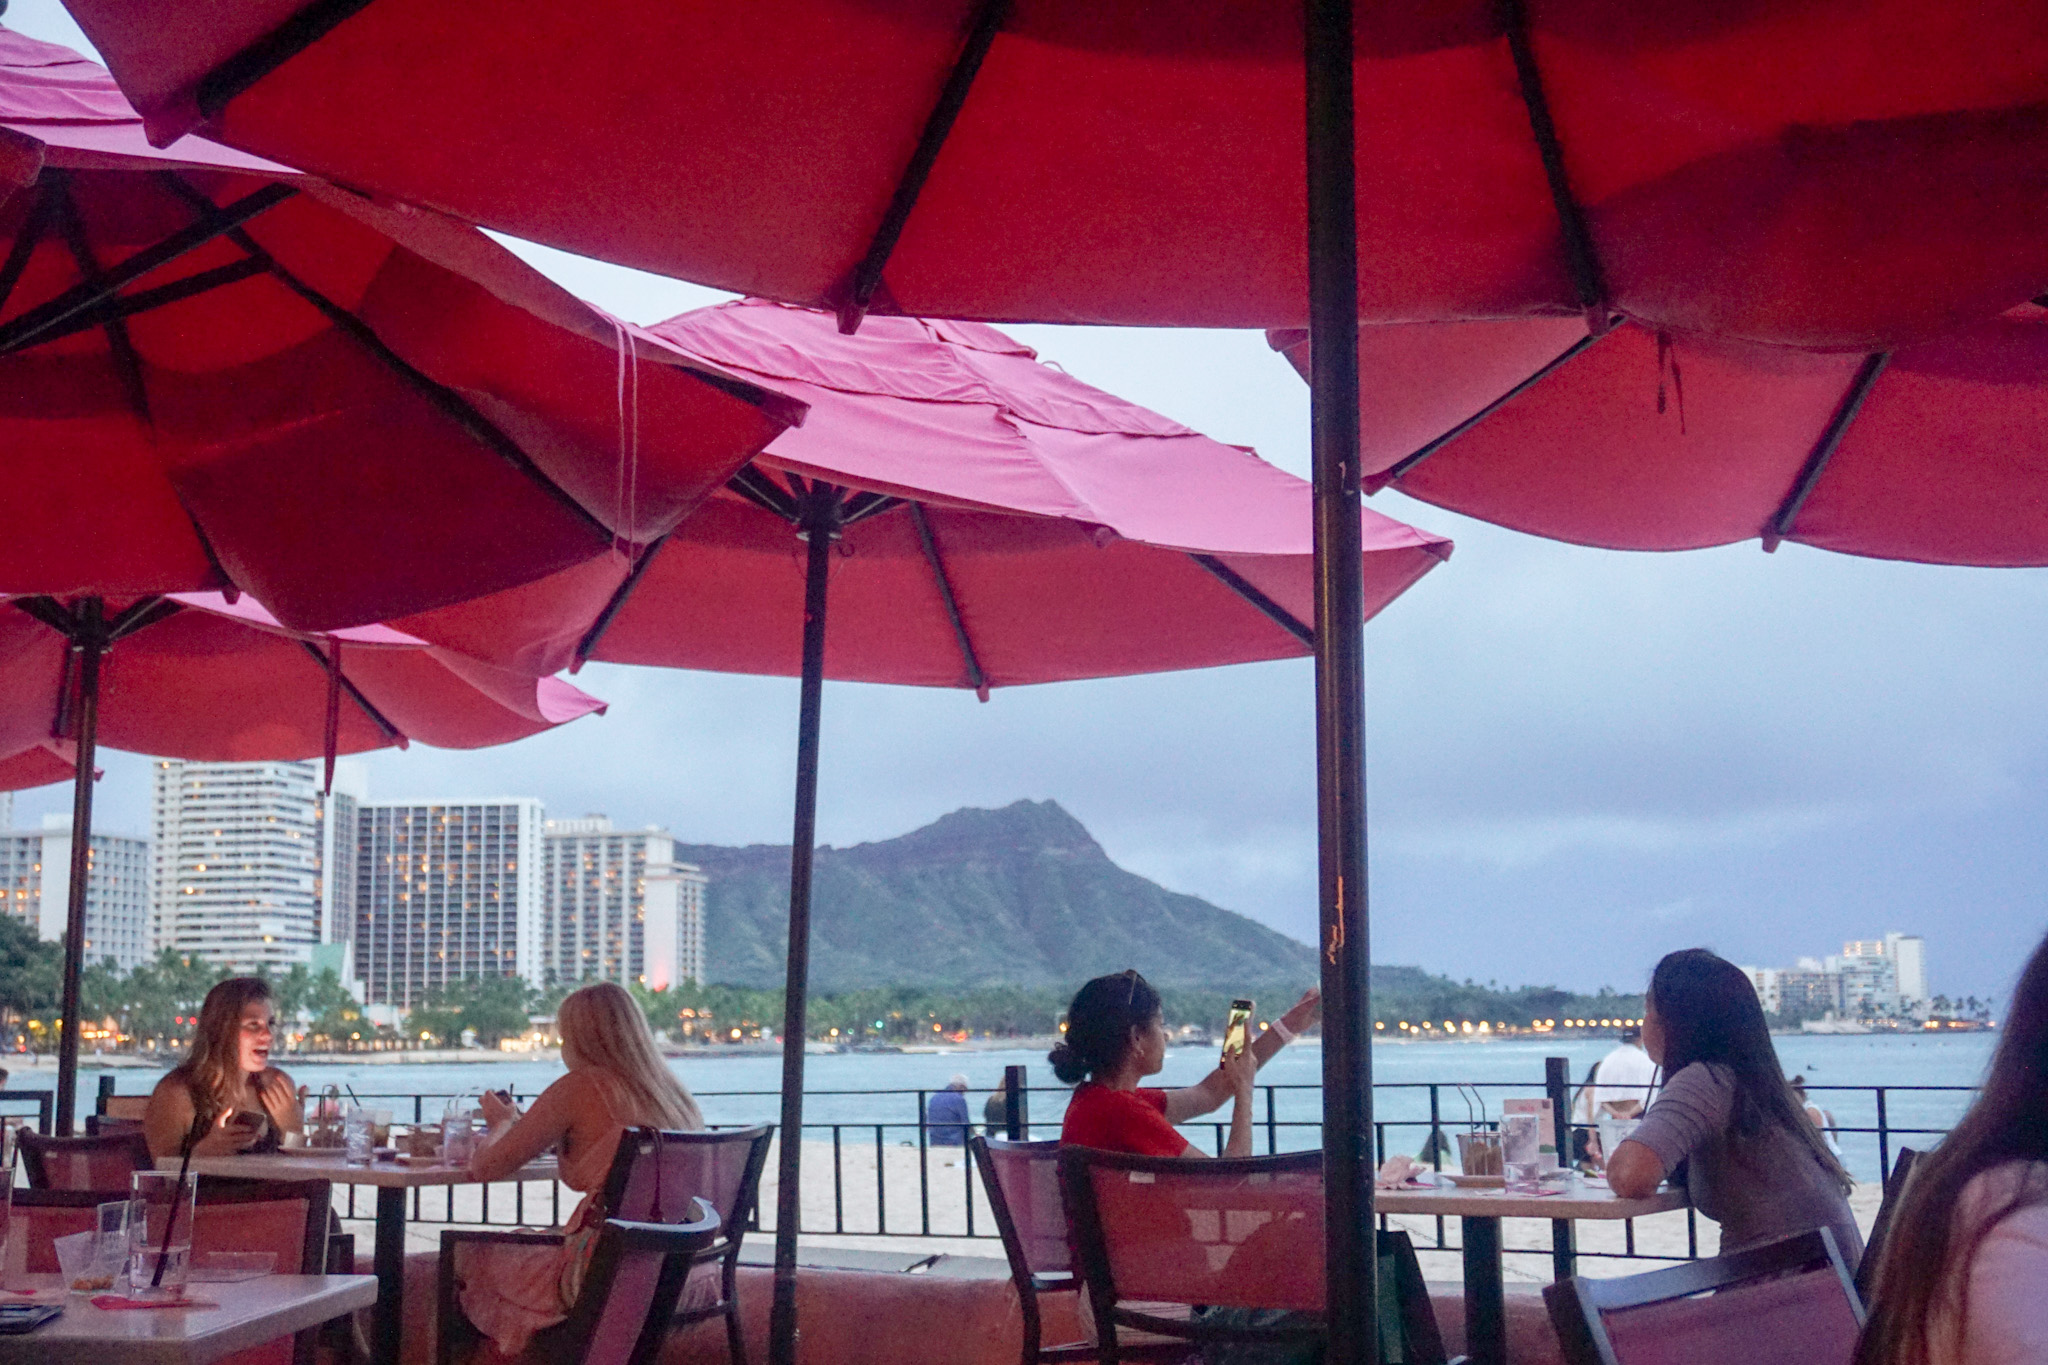 View of Diamond Head from the seating area covered in pink umbrellas